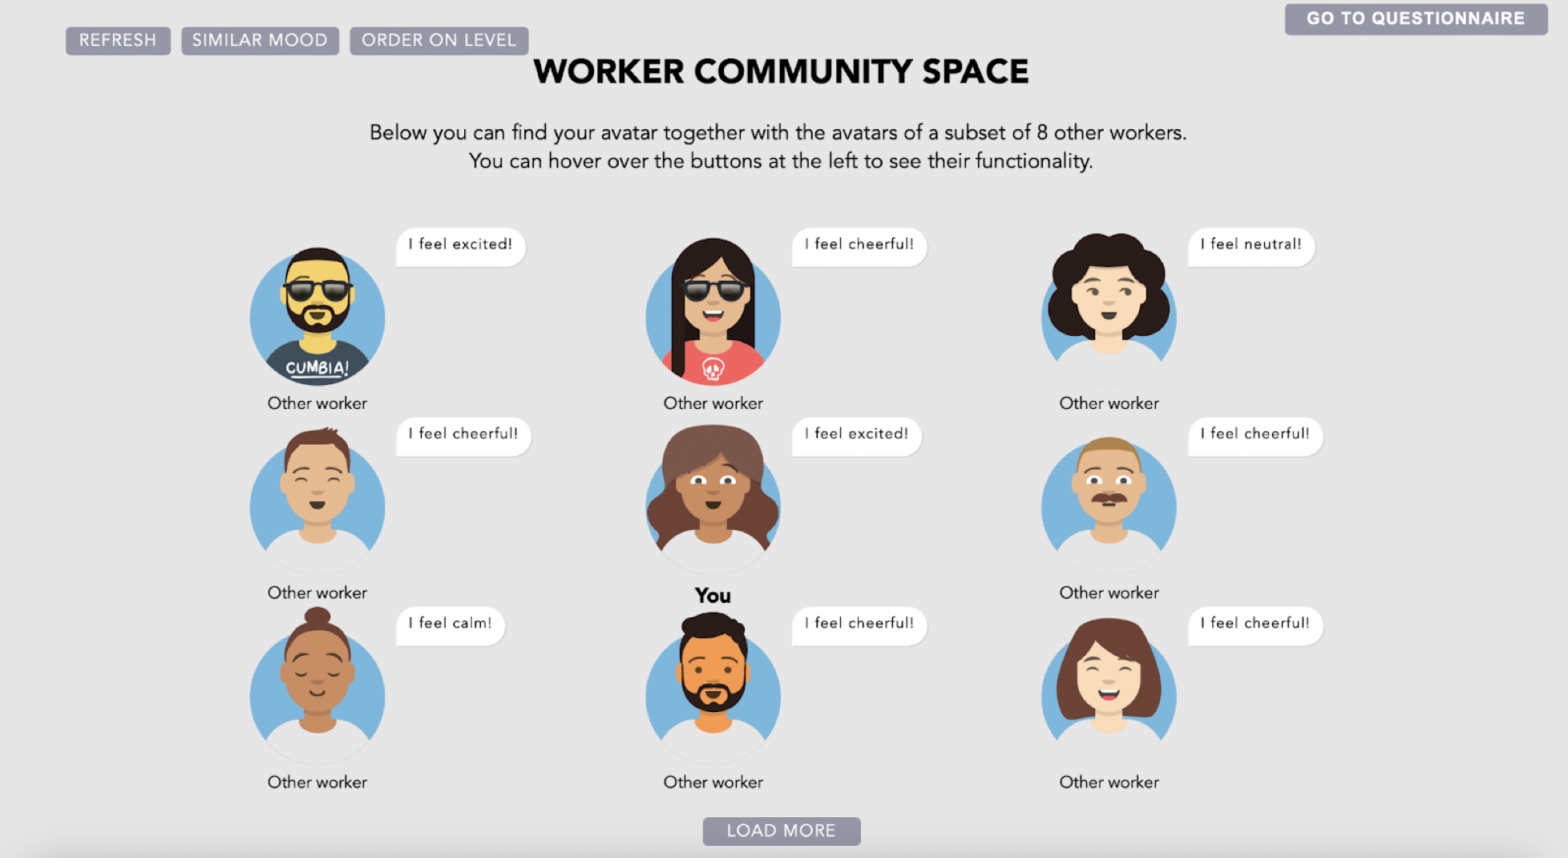 The image is an interface with avatars. It has buttons that allow it to refresh the subset of displayed workers, filter on workers with a similar mood, order workers on level, and load more avatars. The avatar of the worker is surrounded by the other workers’ avatars to induce a sense of group identification